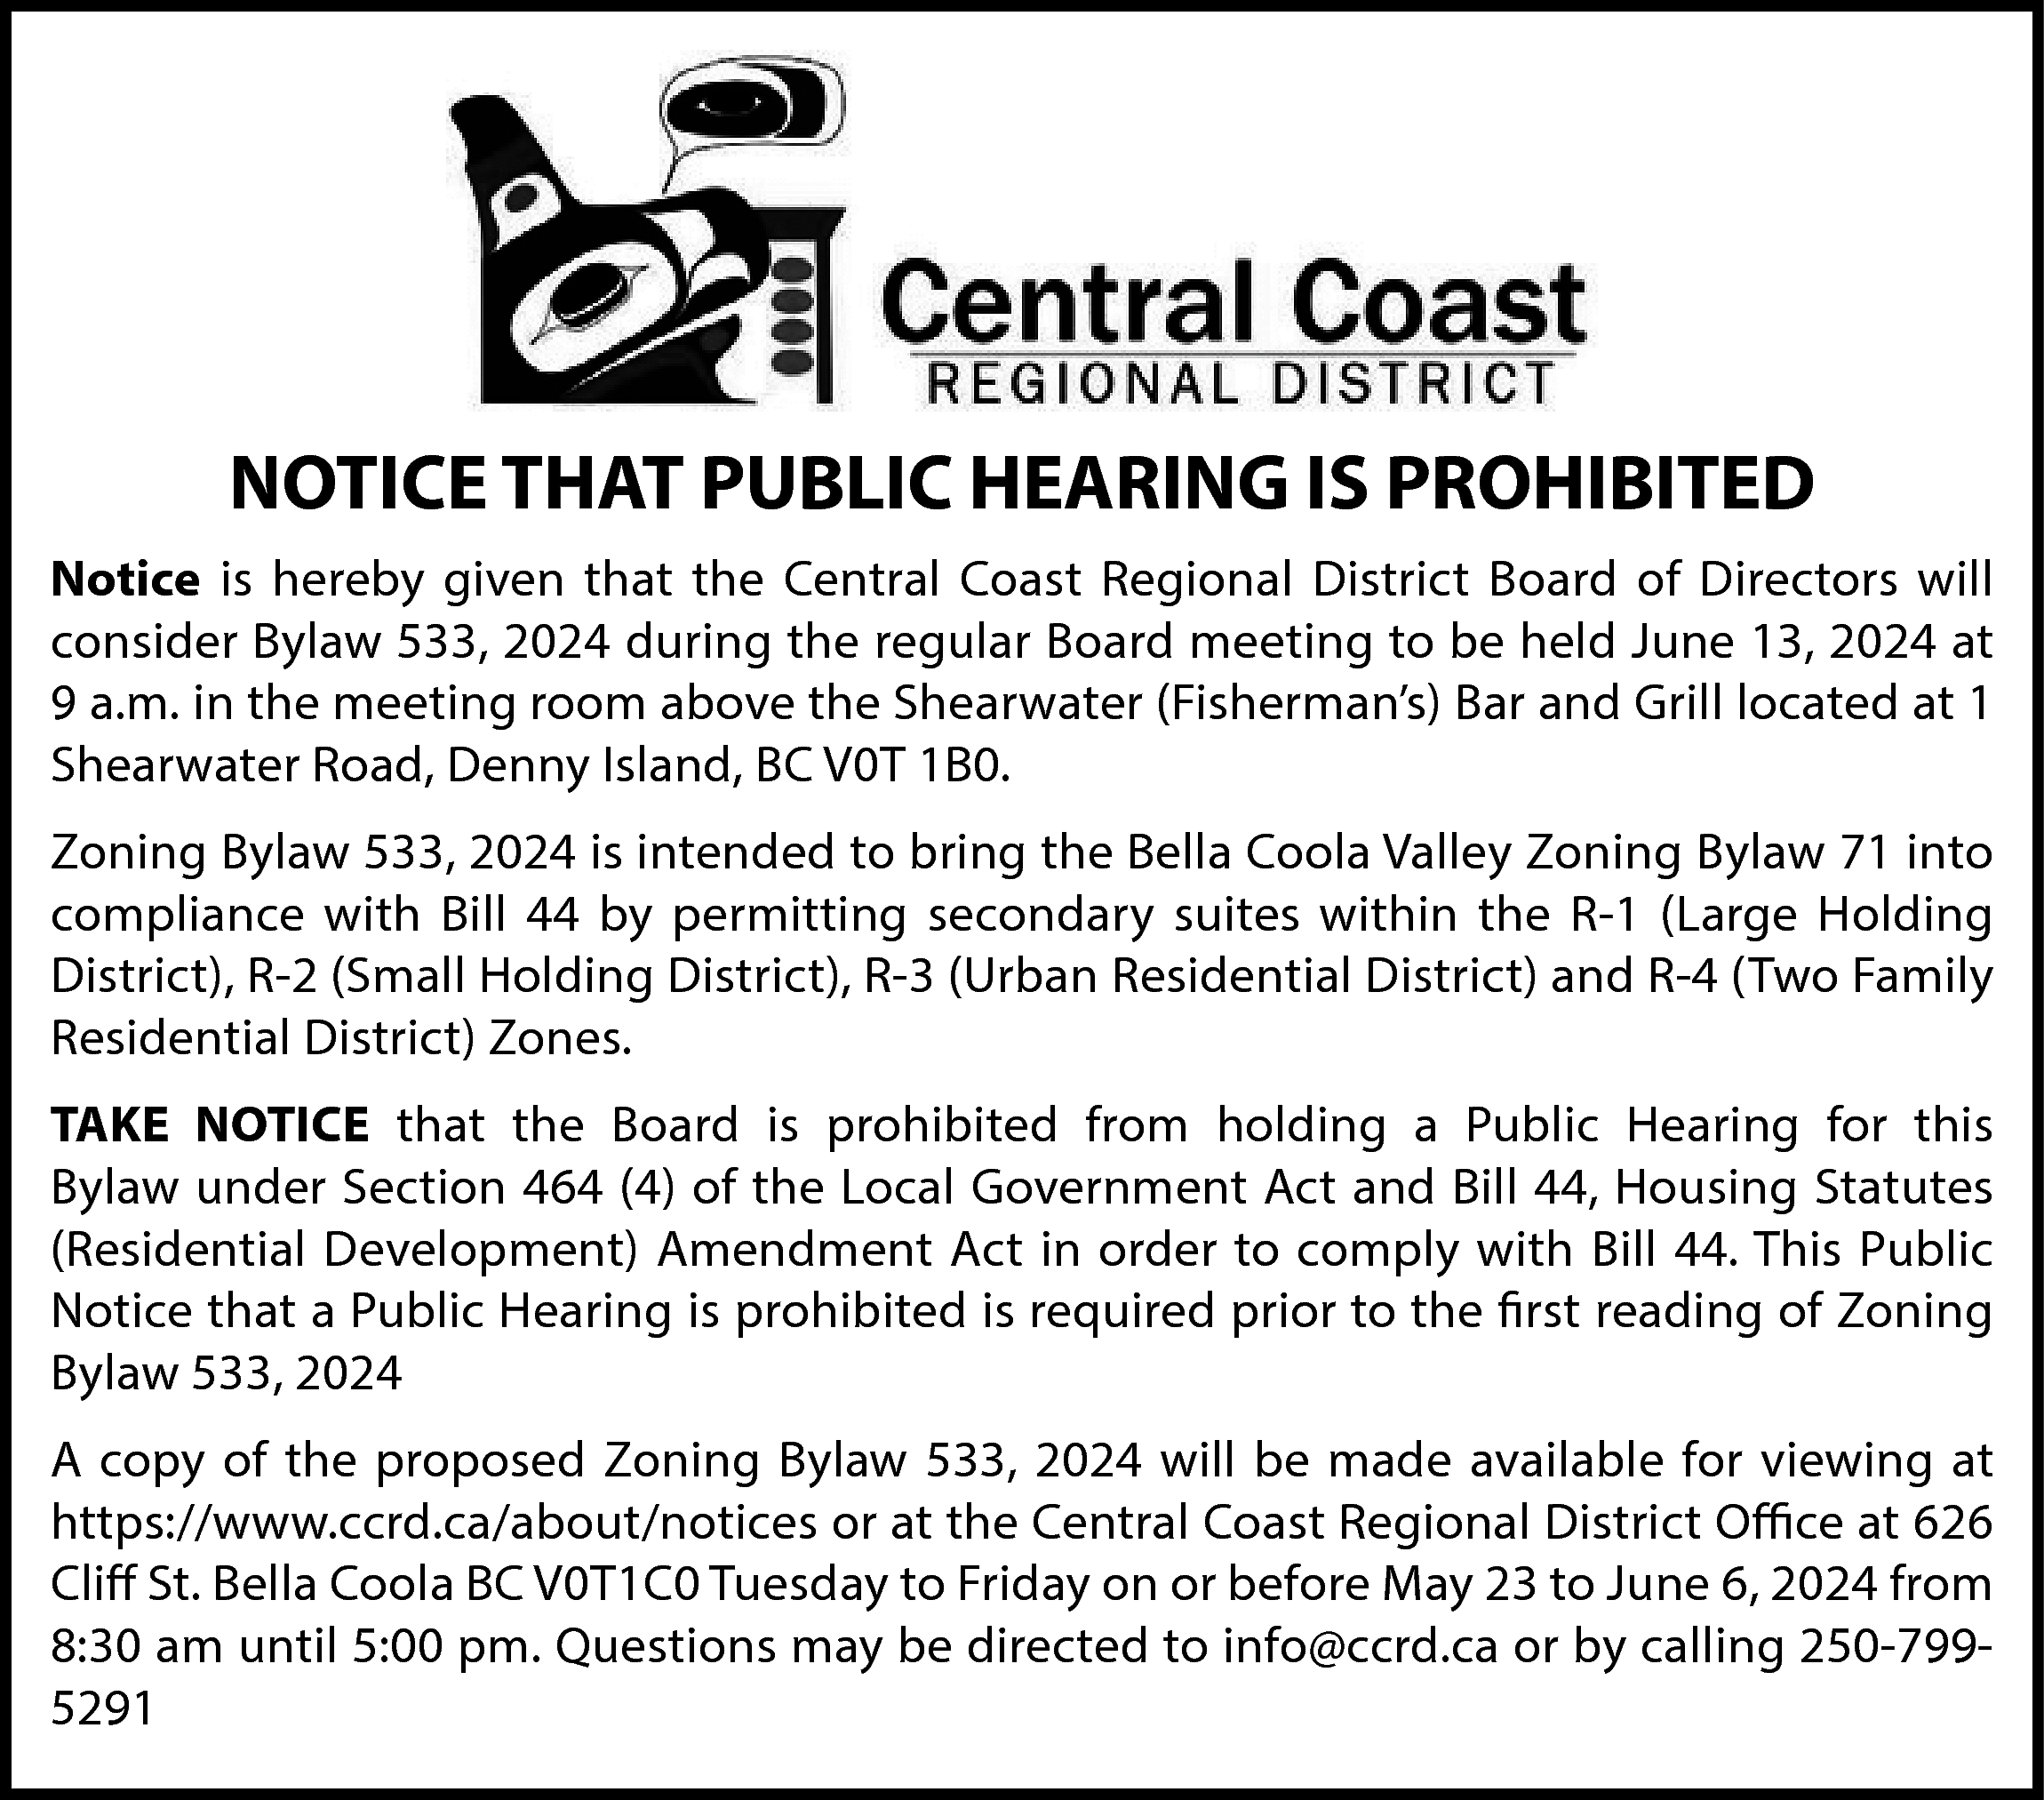 NOTICE THAT PUBLIC HEARING IS  NOTICE THAT PUBLIC HEARING IS PROHIBITED  Notice is hereby given that the Central Coast Regional District Board of Directors will  consider Bylaw 533, 2024 during the regular Board meeting to be held June 13, 2024 at  9 a.m. in the meeting room above the Shearwater (Fisherman’s) Bar and Grill located at 1  Shearwater Road, Denny Island, BC V0T 1B0.  Zoning Bylaw 533, 2024 is intended to bring the Bella Coola Valley Zoning Bylaw 71 into  compliance with Bill 44 by permitting secondary suites within the R-1 (Large Holding  District), R-2 (Small Holding District), R-3 (Urban Residential District) and R-4 (Two Family  Residential District) Zones.  TAKE NOTICE that the Board is prohibited from holding a Public Hearing for this  Bylaw under Section 464 (4) of the Local Government Act and Bill 44, Housing Statutes  (Residential Development) Amendment Act in order to comply with Bill 44. This Public  Notice that a Public Hearing is prohibited is required prior to the first reading of Zoning  Bylaw 533, 2024  A copy of the proposed Zoning Bylaw 533, 2024 will be made available for viewing at  https://www.ccrd.ca/about/notices or at the Central Coast Regional District Office at 626  Cliff St. Bella Coola BC V0T1C0 Tuesday to Friday on or before May 23 to June 6, 2024 from  8:30 am until 5:00 pm. Questions may be directed to info@ccrd.ca or by calling 250-7995291    